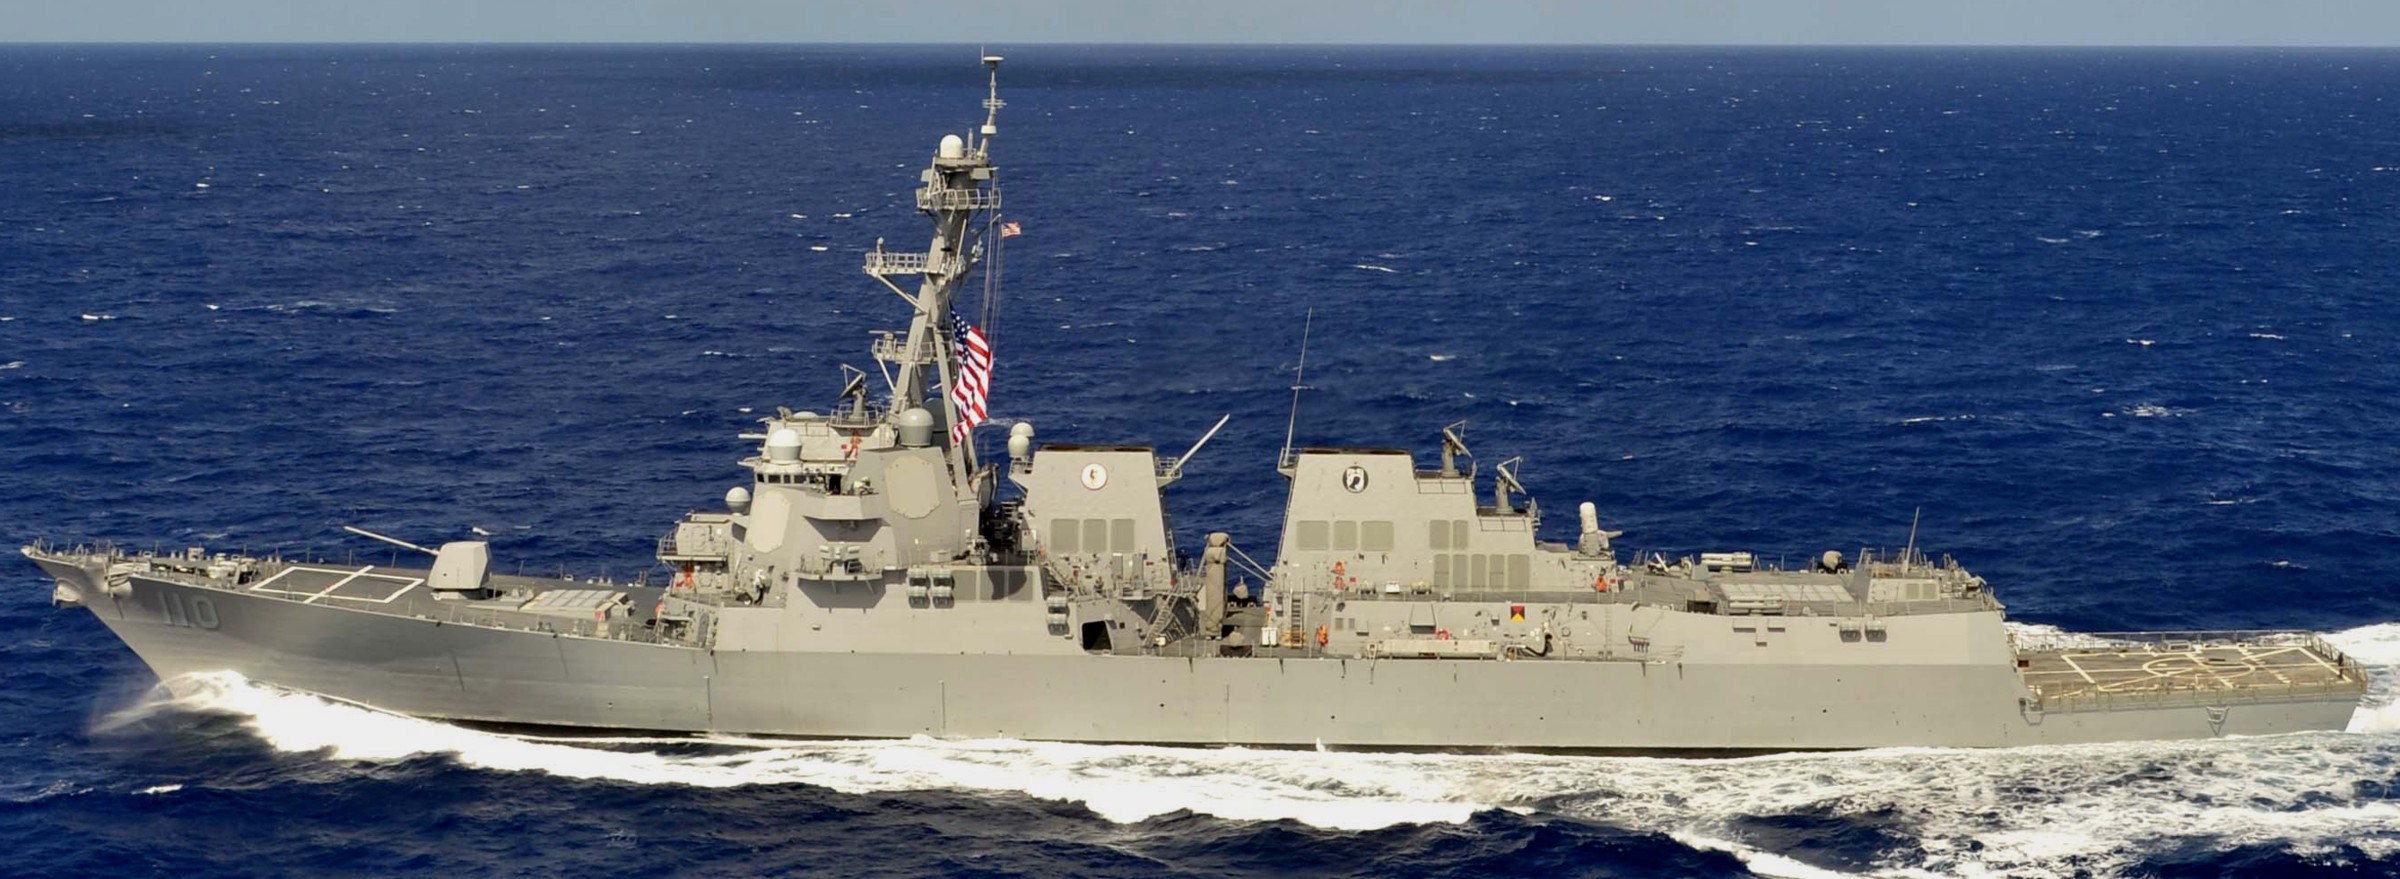 ddg-110 uss william p. lawrence arleigh burke class guided missile destroyer aegis us navy 04